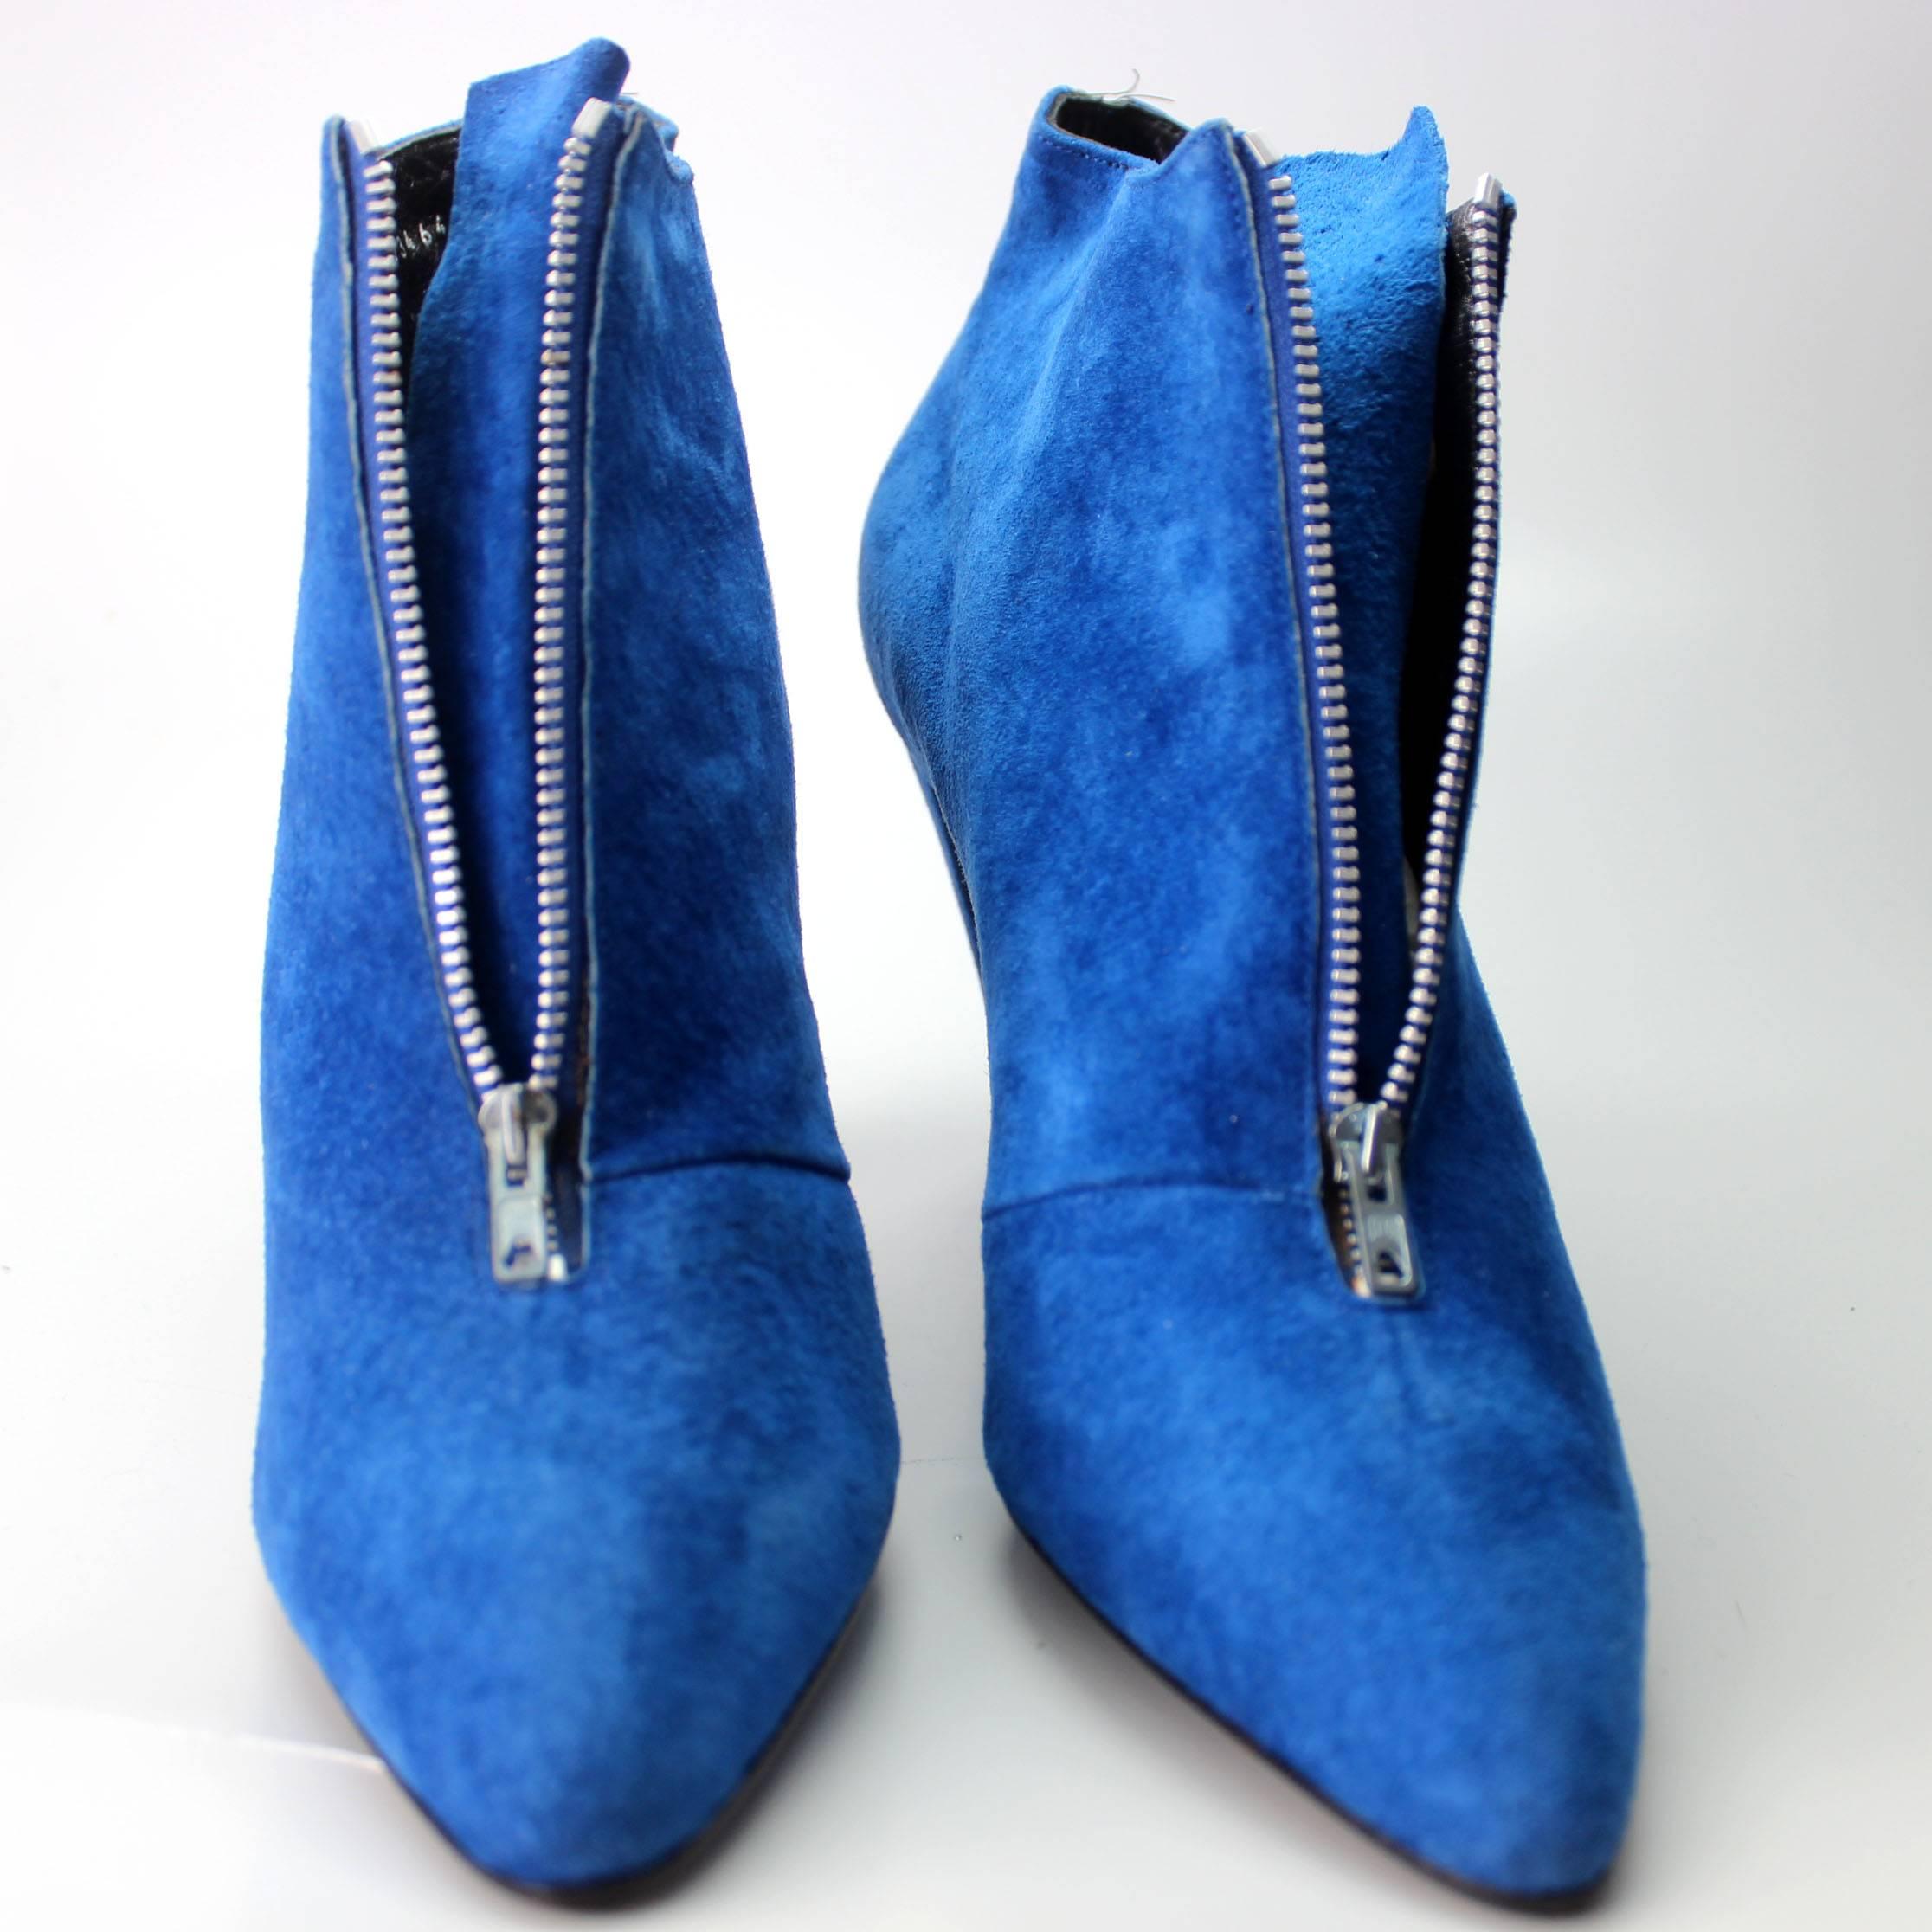 Stephane Kelian produced his first shoe collection in the late 70's. His designs were innovative and very well crafted. In the 1980's he did several collaborations with well known clothing designers. This pair of boots is one of his most successful,